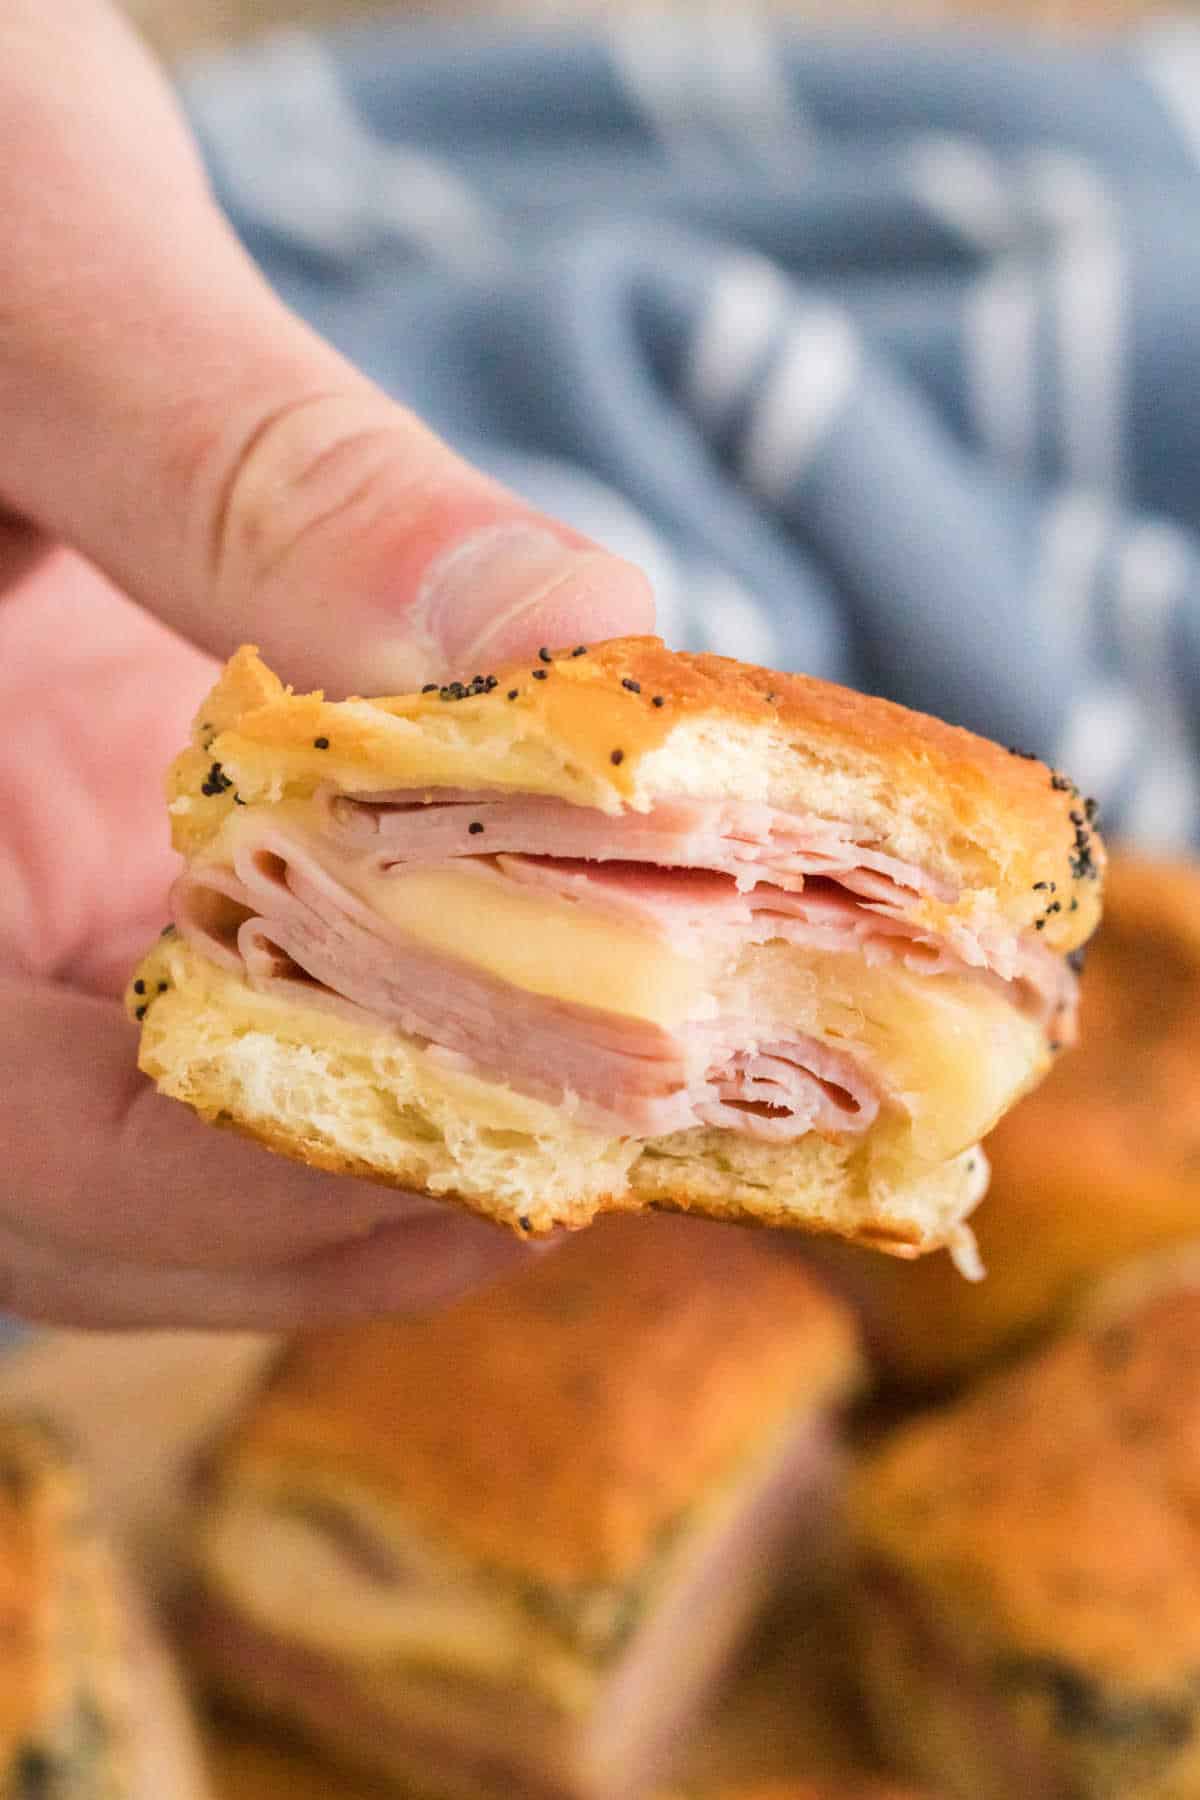 A hand holding a ham and cheese slider with a bite out of it.